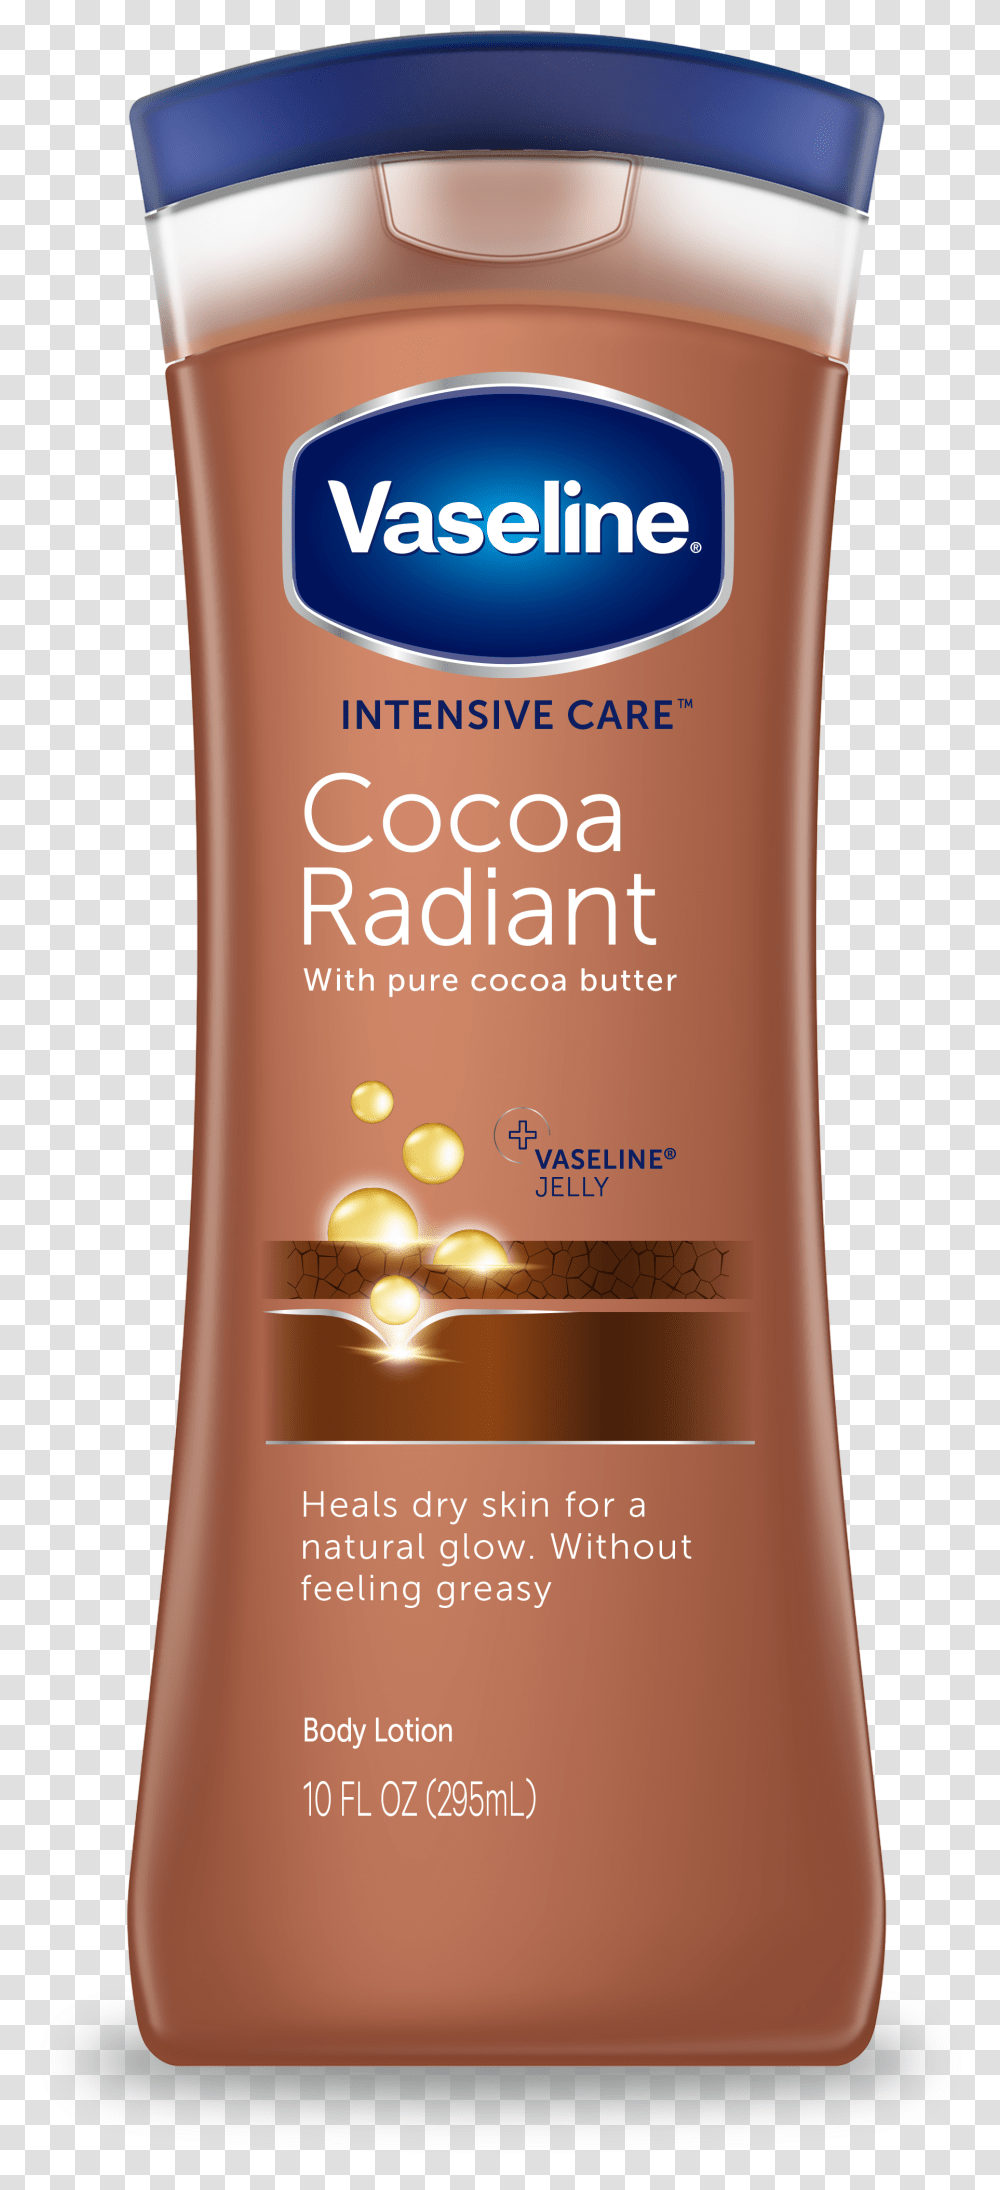 Vaseline Intensive Care Body Lotion Cocoa Radiant Chocolate, Bottle, Cosmetics, Sunscreen, Label Transparent Png